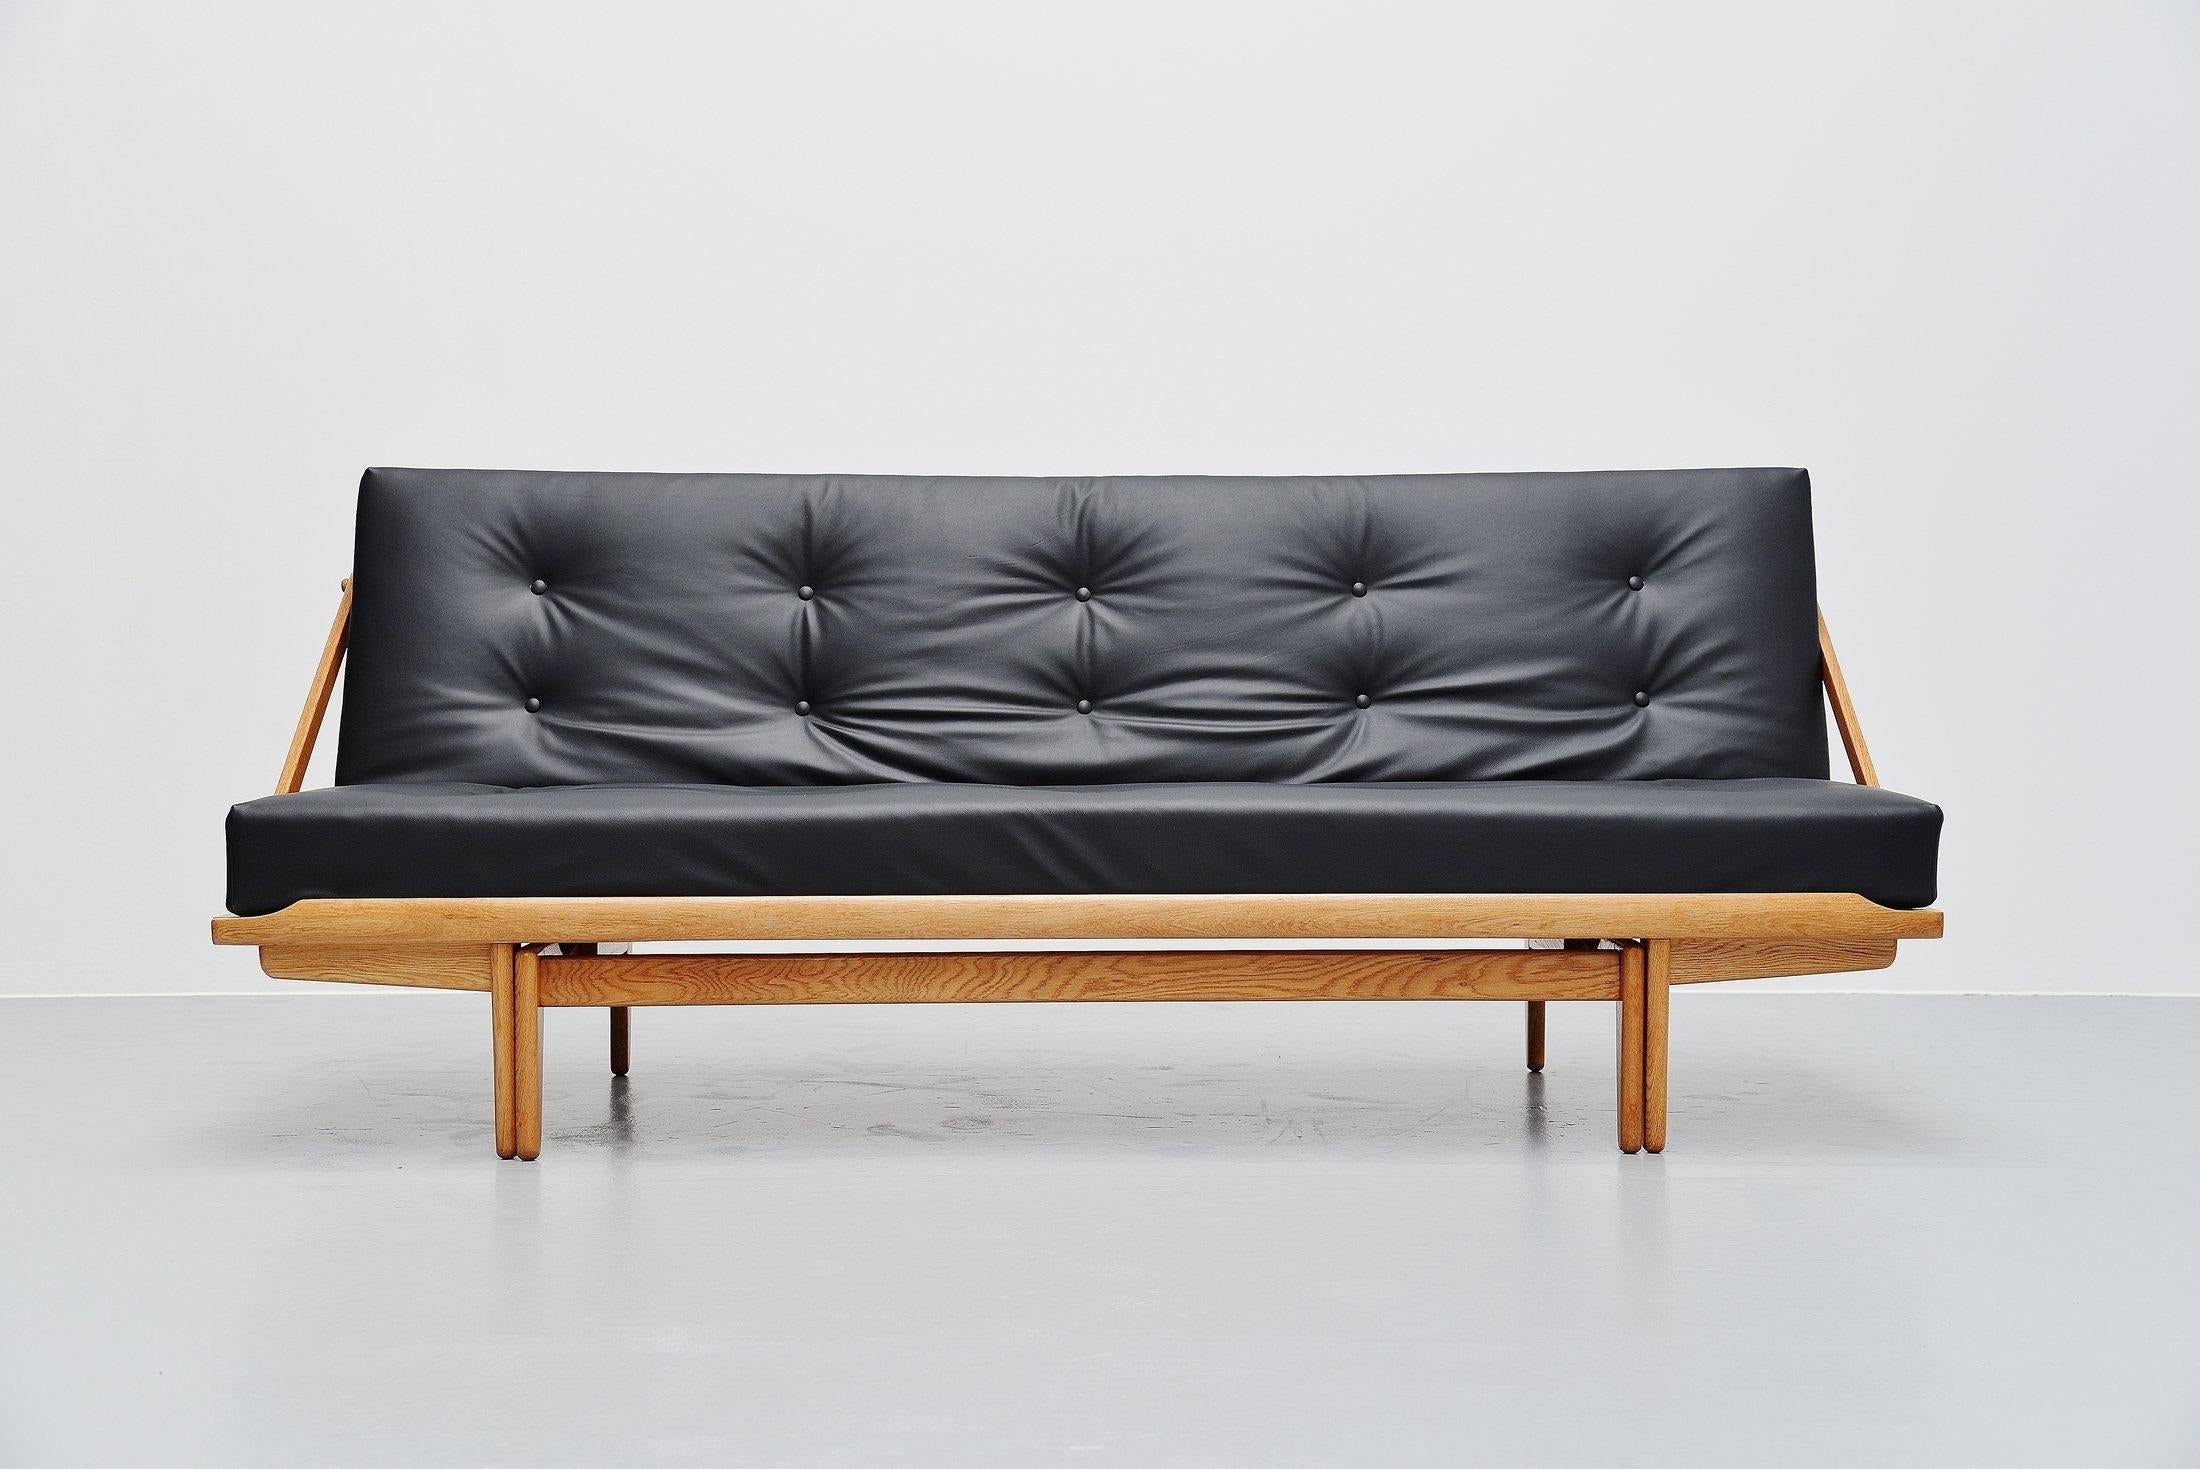 Very nice sophisticated daybed sofa Model 981 designed by Poul M Volther and manufactured by Gemla, Denmark, 1959. This sofa is called 'Diva' and has a solid oak structure which can be folded down to create a daybed. Multi functional sofa. The sofa